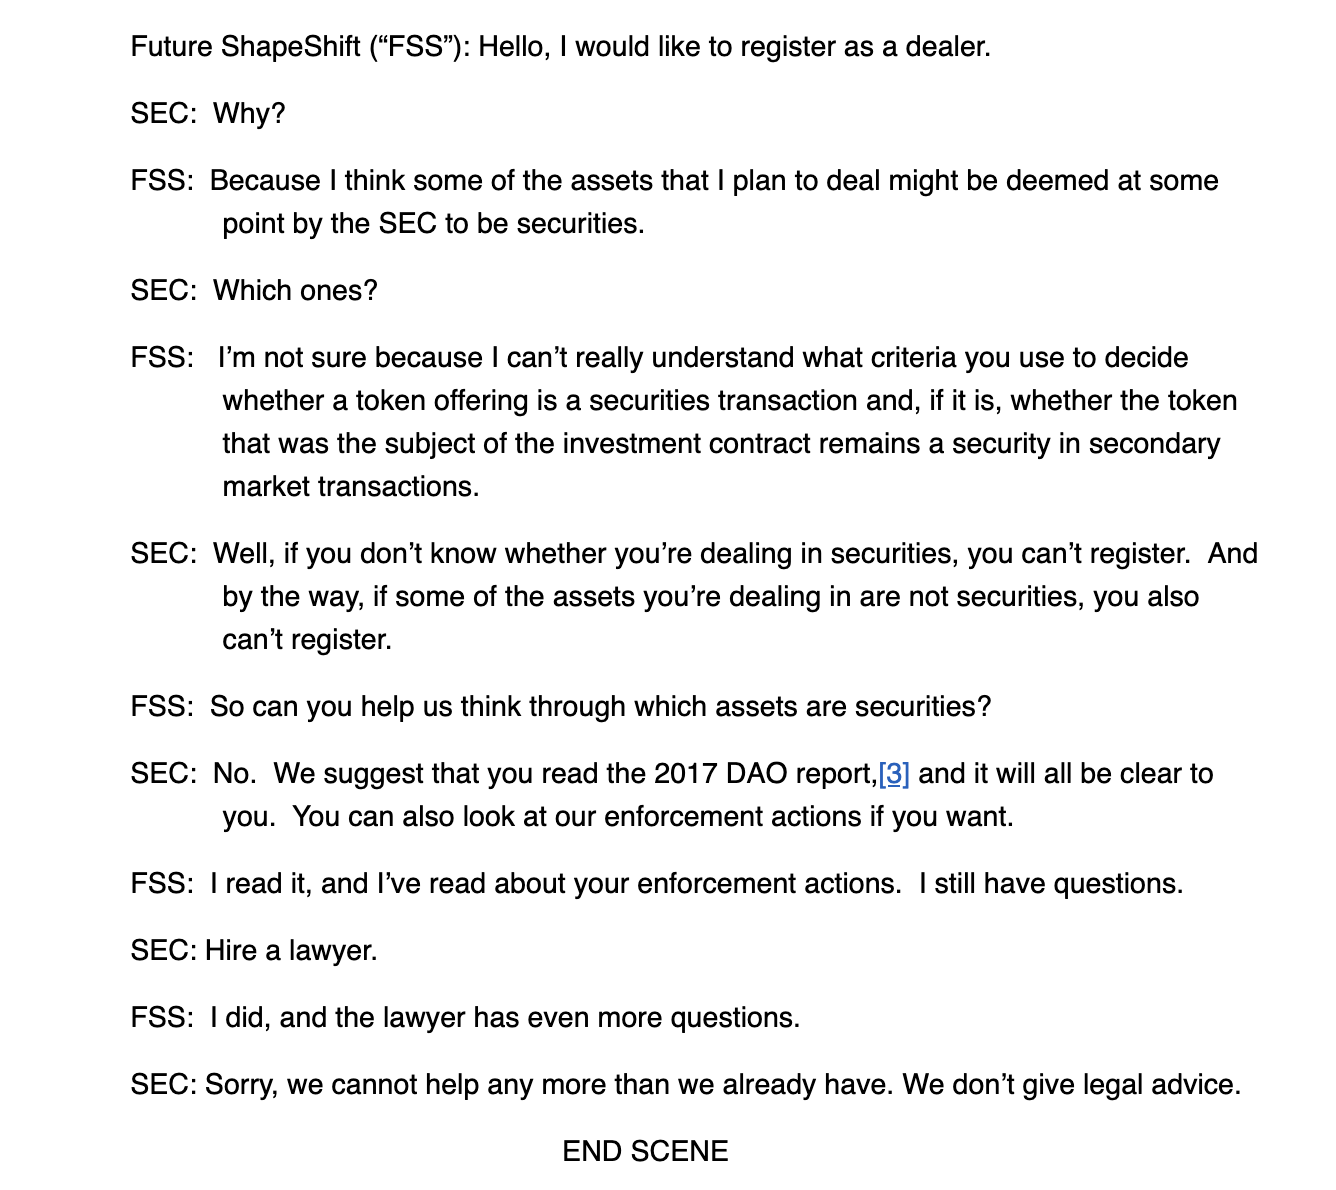 In relation to cryptomarkets, the SEC has pursued a regulation-by-enforcement regime, discouraging capital formation and hurting innovation. The above skit was not drafted by an activist, or disgruntled Web3 project, but by SEC Commissioner Hester Peirce and SEC Commissioner Mark T. Uyeda, highlighting the absurdities of her agency’s approach to crypto. Such a poorly implemented regulatory regime raises important sociopolitical questions. To whom is this weaponized incompetence supporting? Why is the SEC trying to hurt innovators? Source: Screenshot of an article (https://www.sec.gov/news/statement/peirce-uyeda-statement-a-crypto-world-turns-03-06-24) by Commissioner Hester Peirce and Commissioner Mark T. Uyeda available on the US Securities and Exchange Commission website (https://www.sec.gov/), used under a fair use rationale.